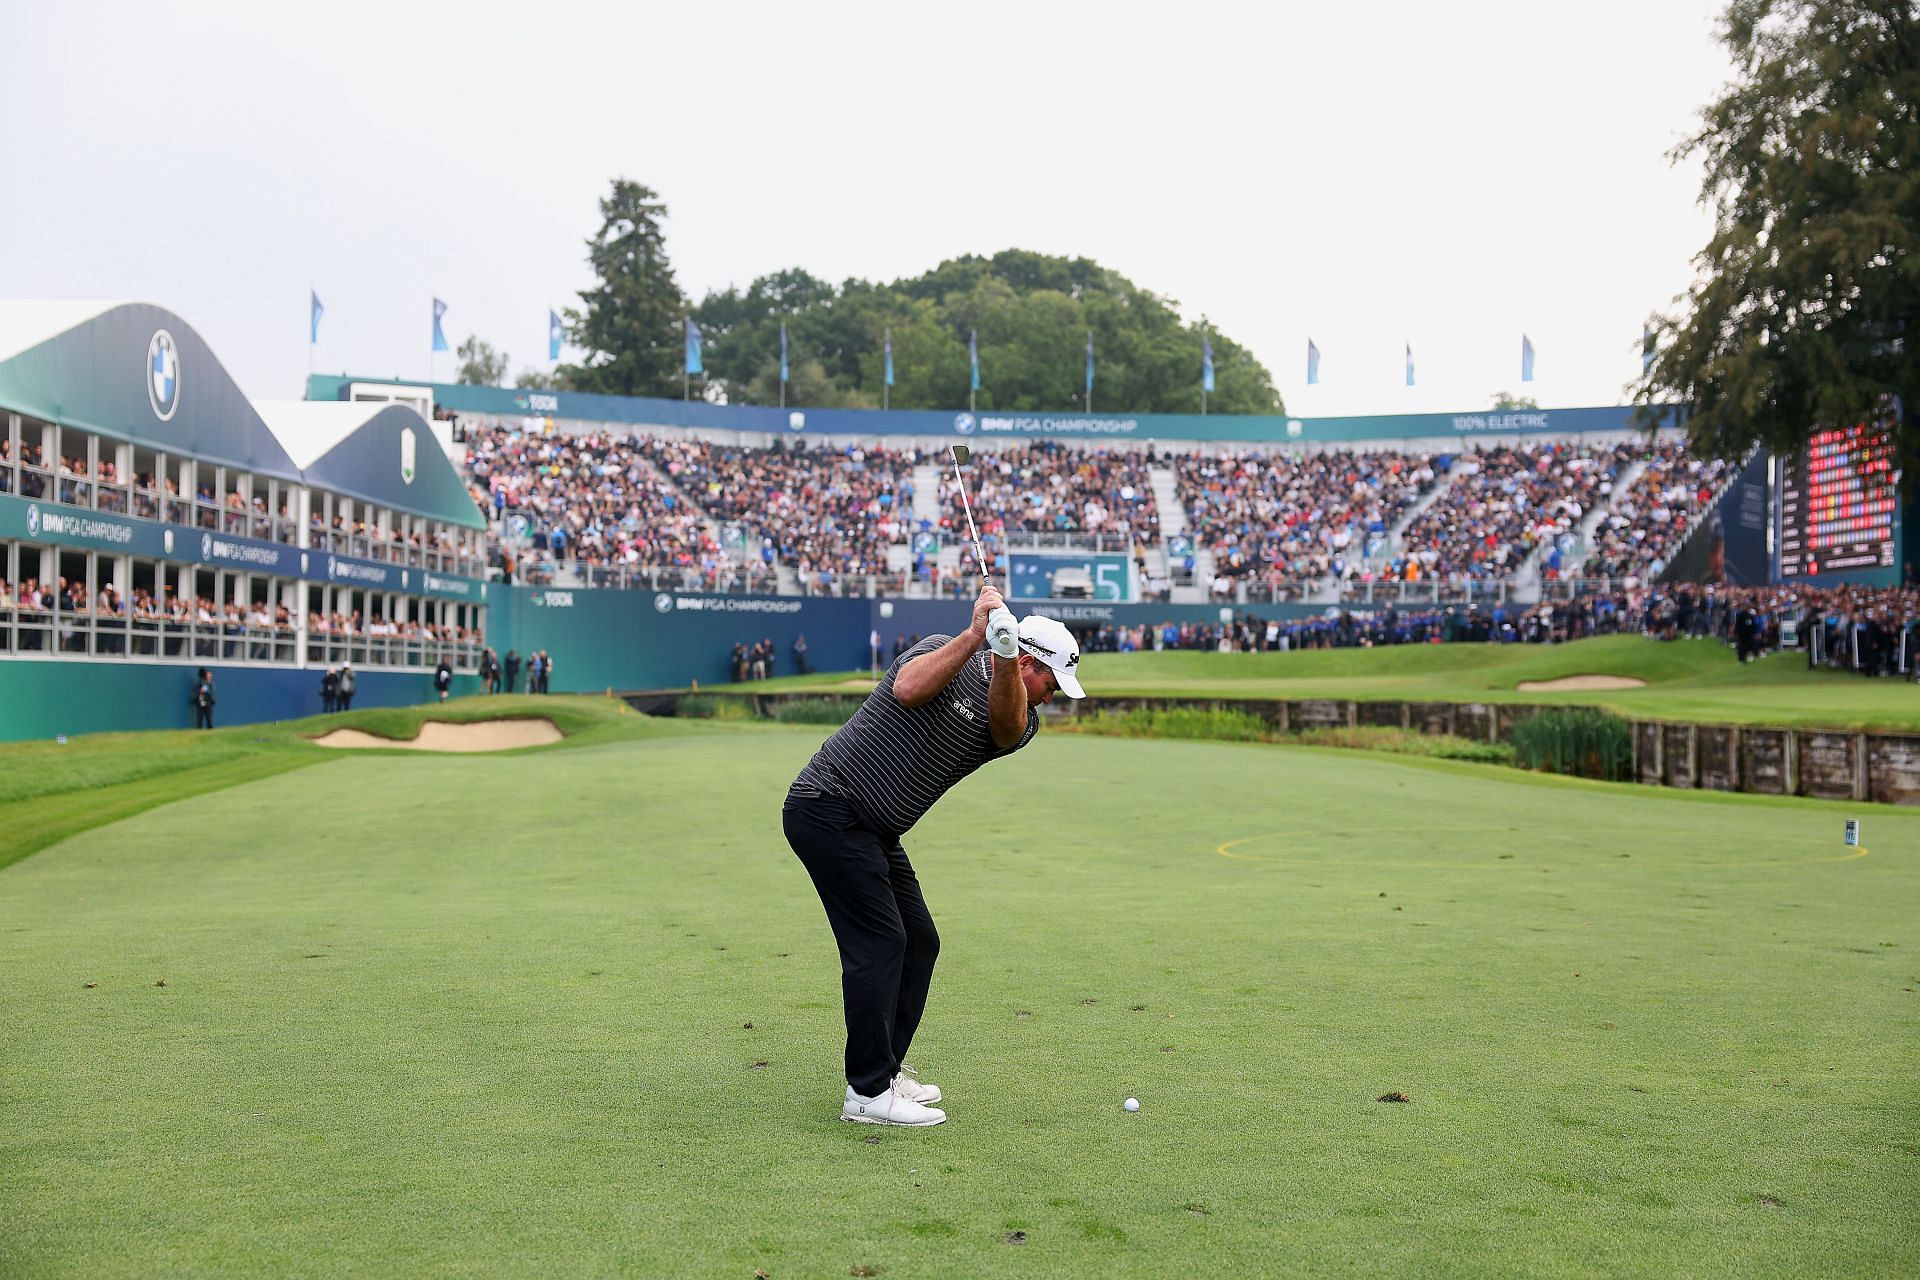 BMW PGA Championship leaderboard, payouts and more